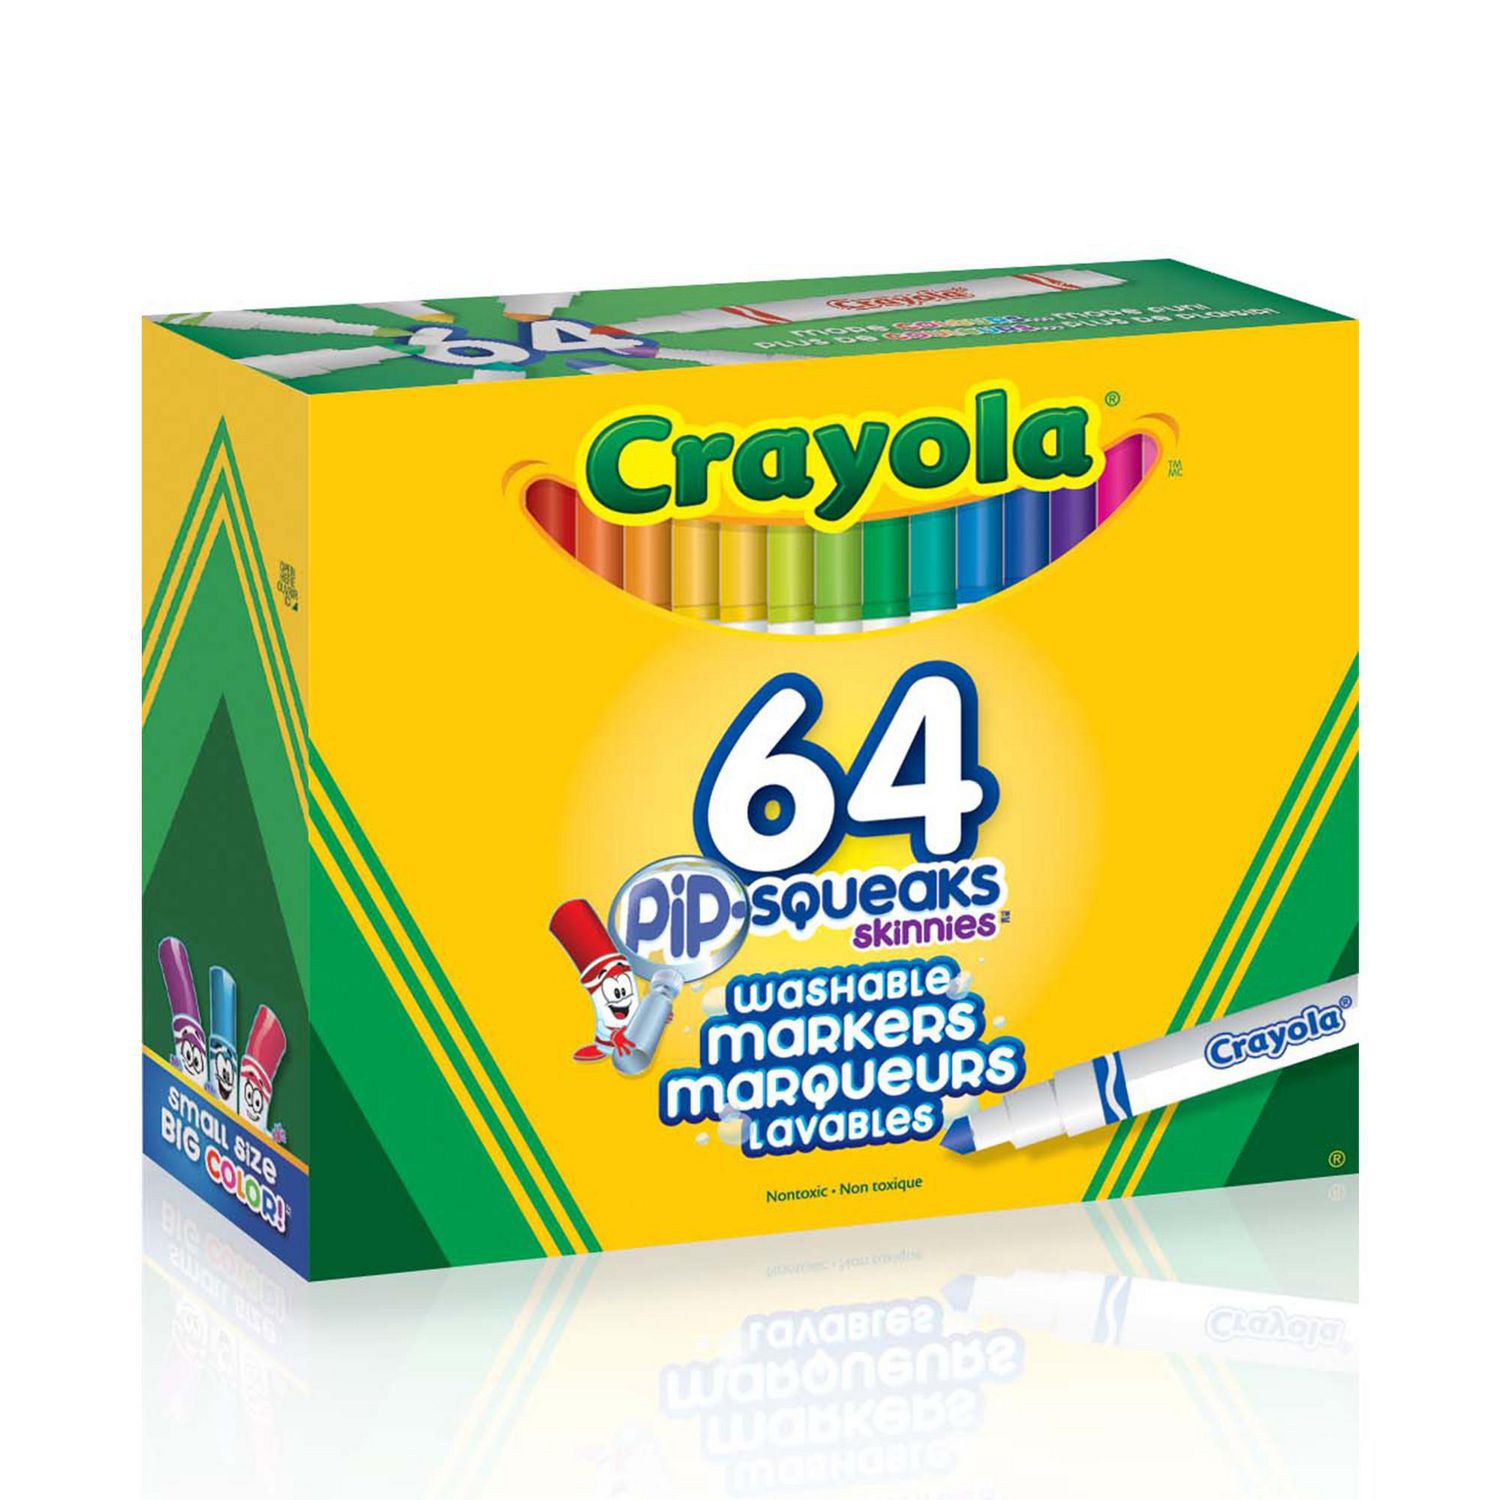 Crayola Pip-Squeaks Skinnies Washable Markers, 64 Count